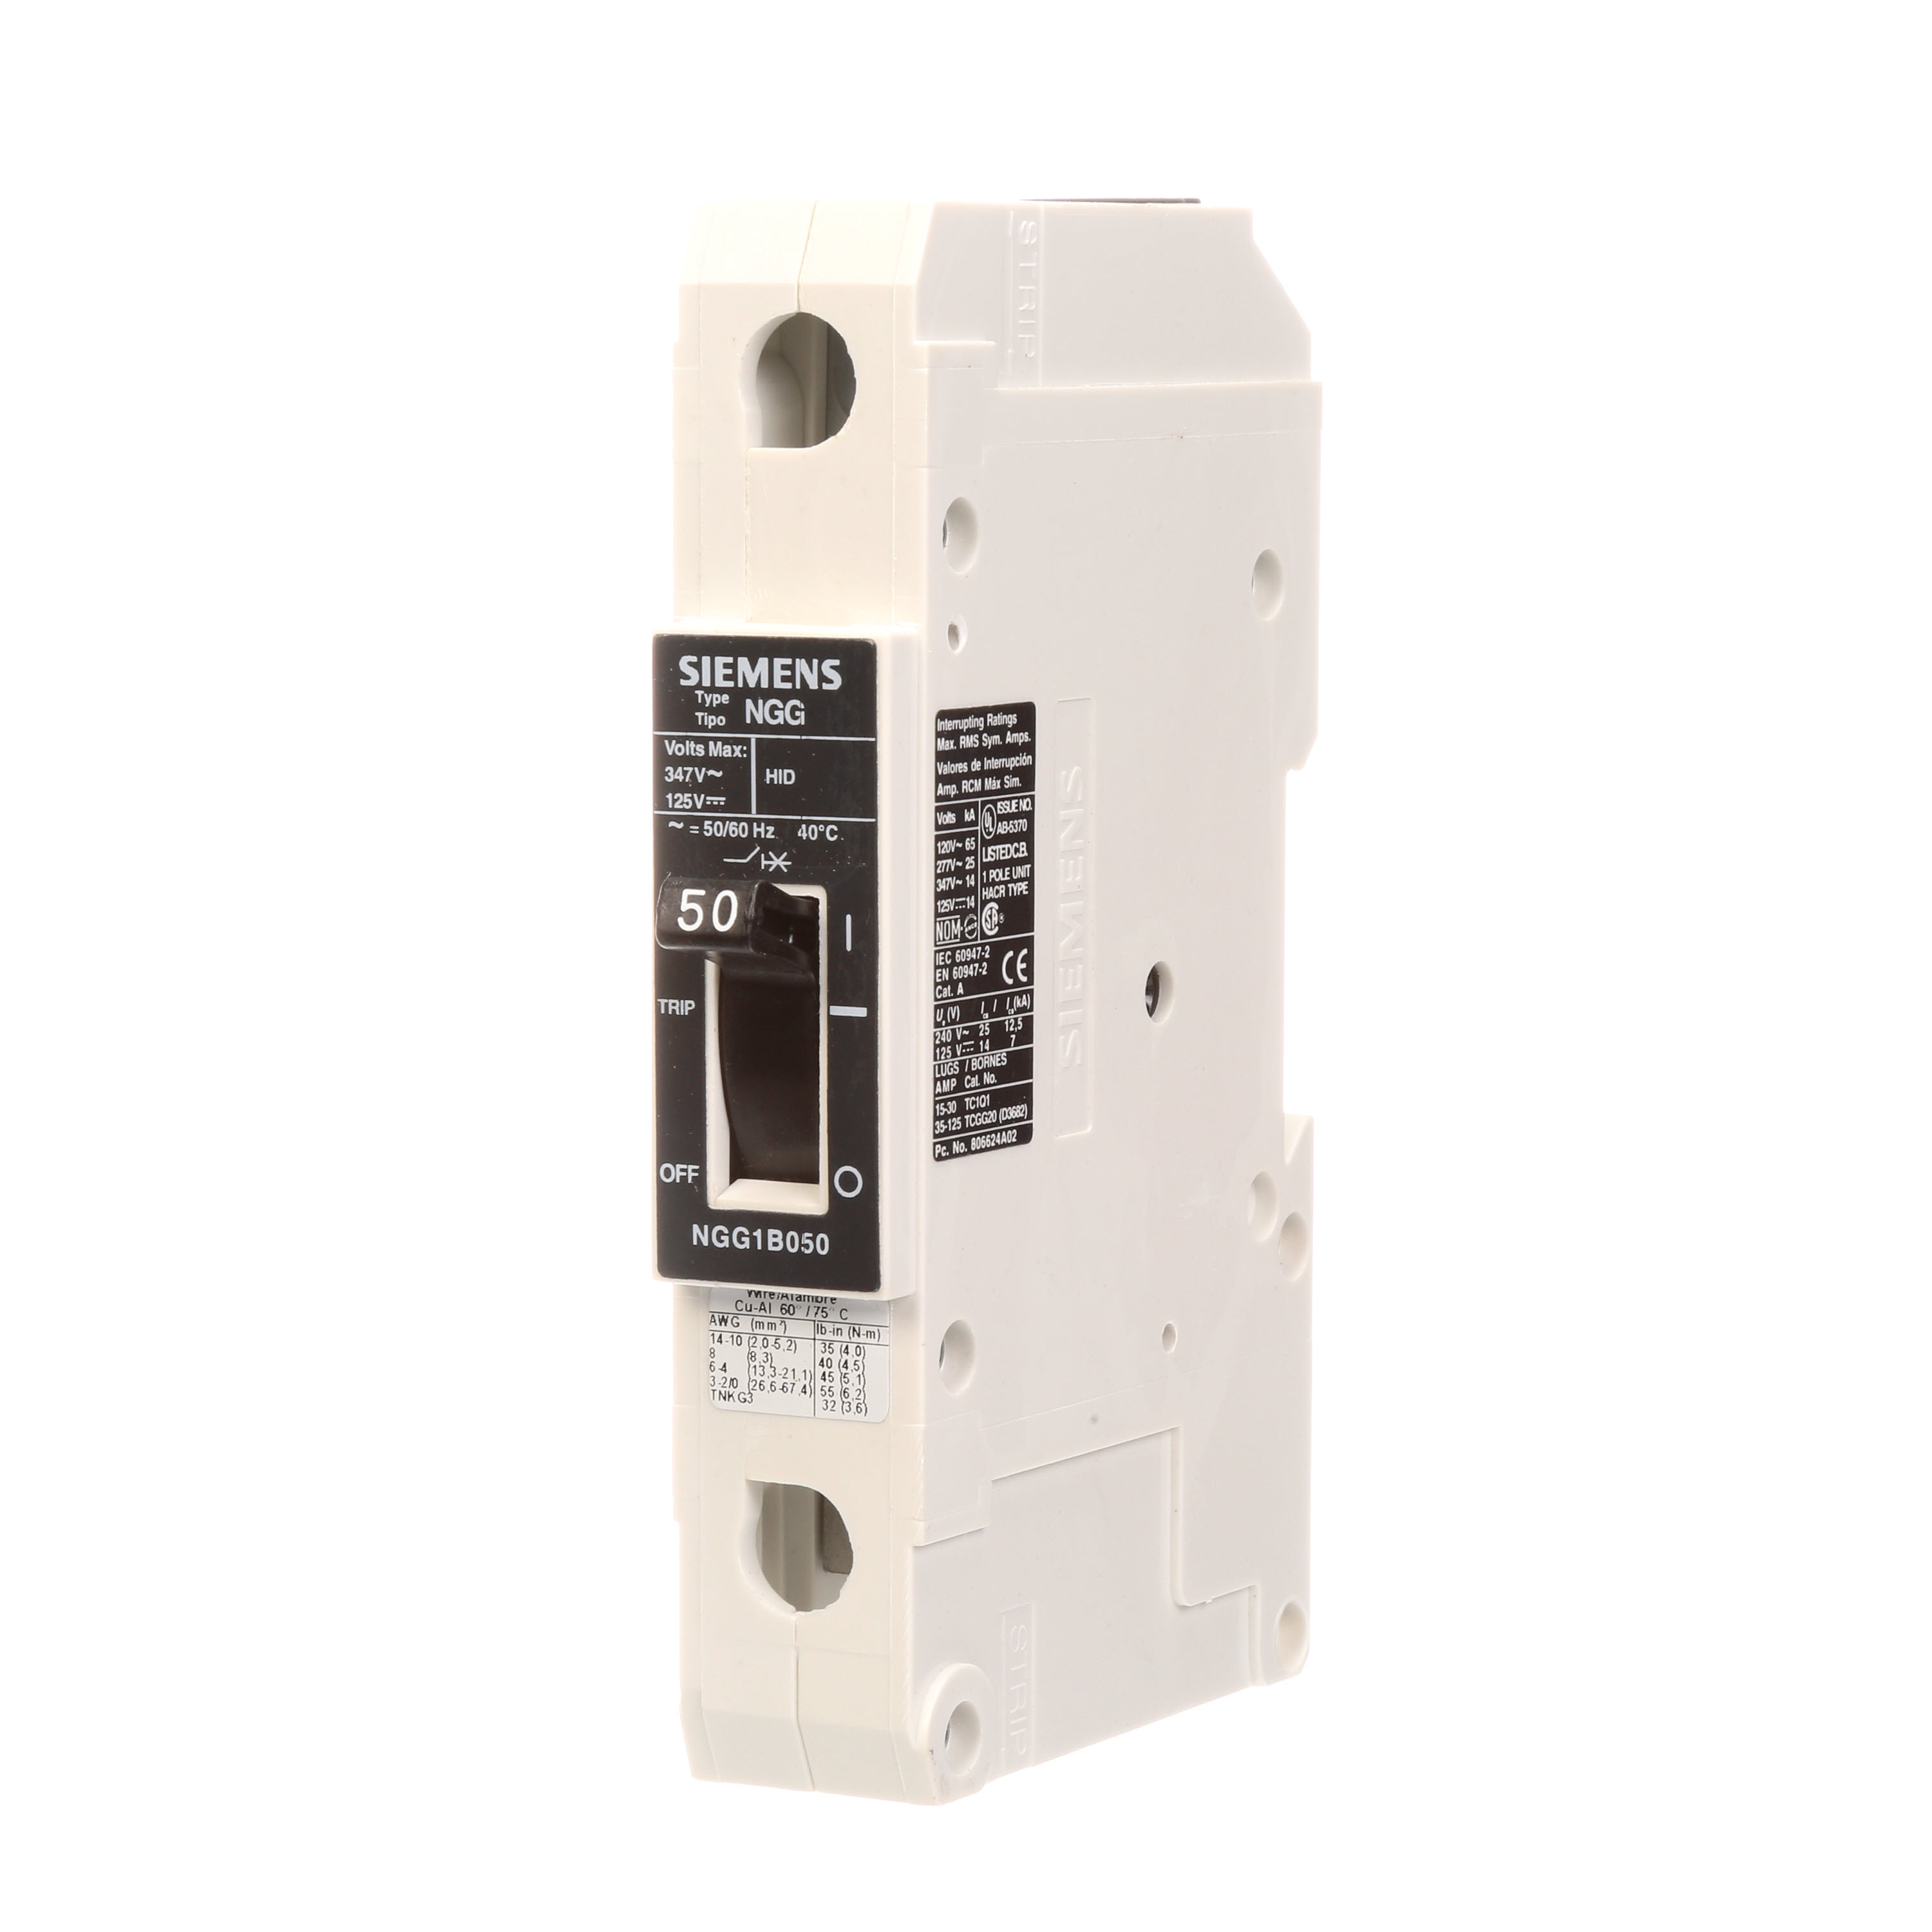 SIEMENS LOW VOLTAGE G FRAME CIRCUIT BREAKER WITH THERMAL - MAGNETIC TRIP. UL LISTED NGG FRAME WITH STANDARD BREAKING CAPACITY. 50A 1-POLE (14KAIC AT 347V) (25KAIC AT 277V). SPECIAL FEATURES MOUNTS ON DIN RAIL / SCREW, LINE AND LOAD SIDE LUGS (TC1GG20) WIRE RANGE 8 - 1/0 AWS (CU/AL). DIMENSIONS (W x H x D) IN 1 x 5.4 x2.8.